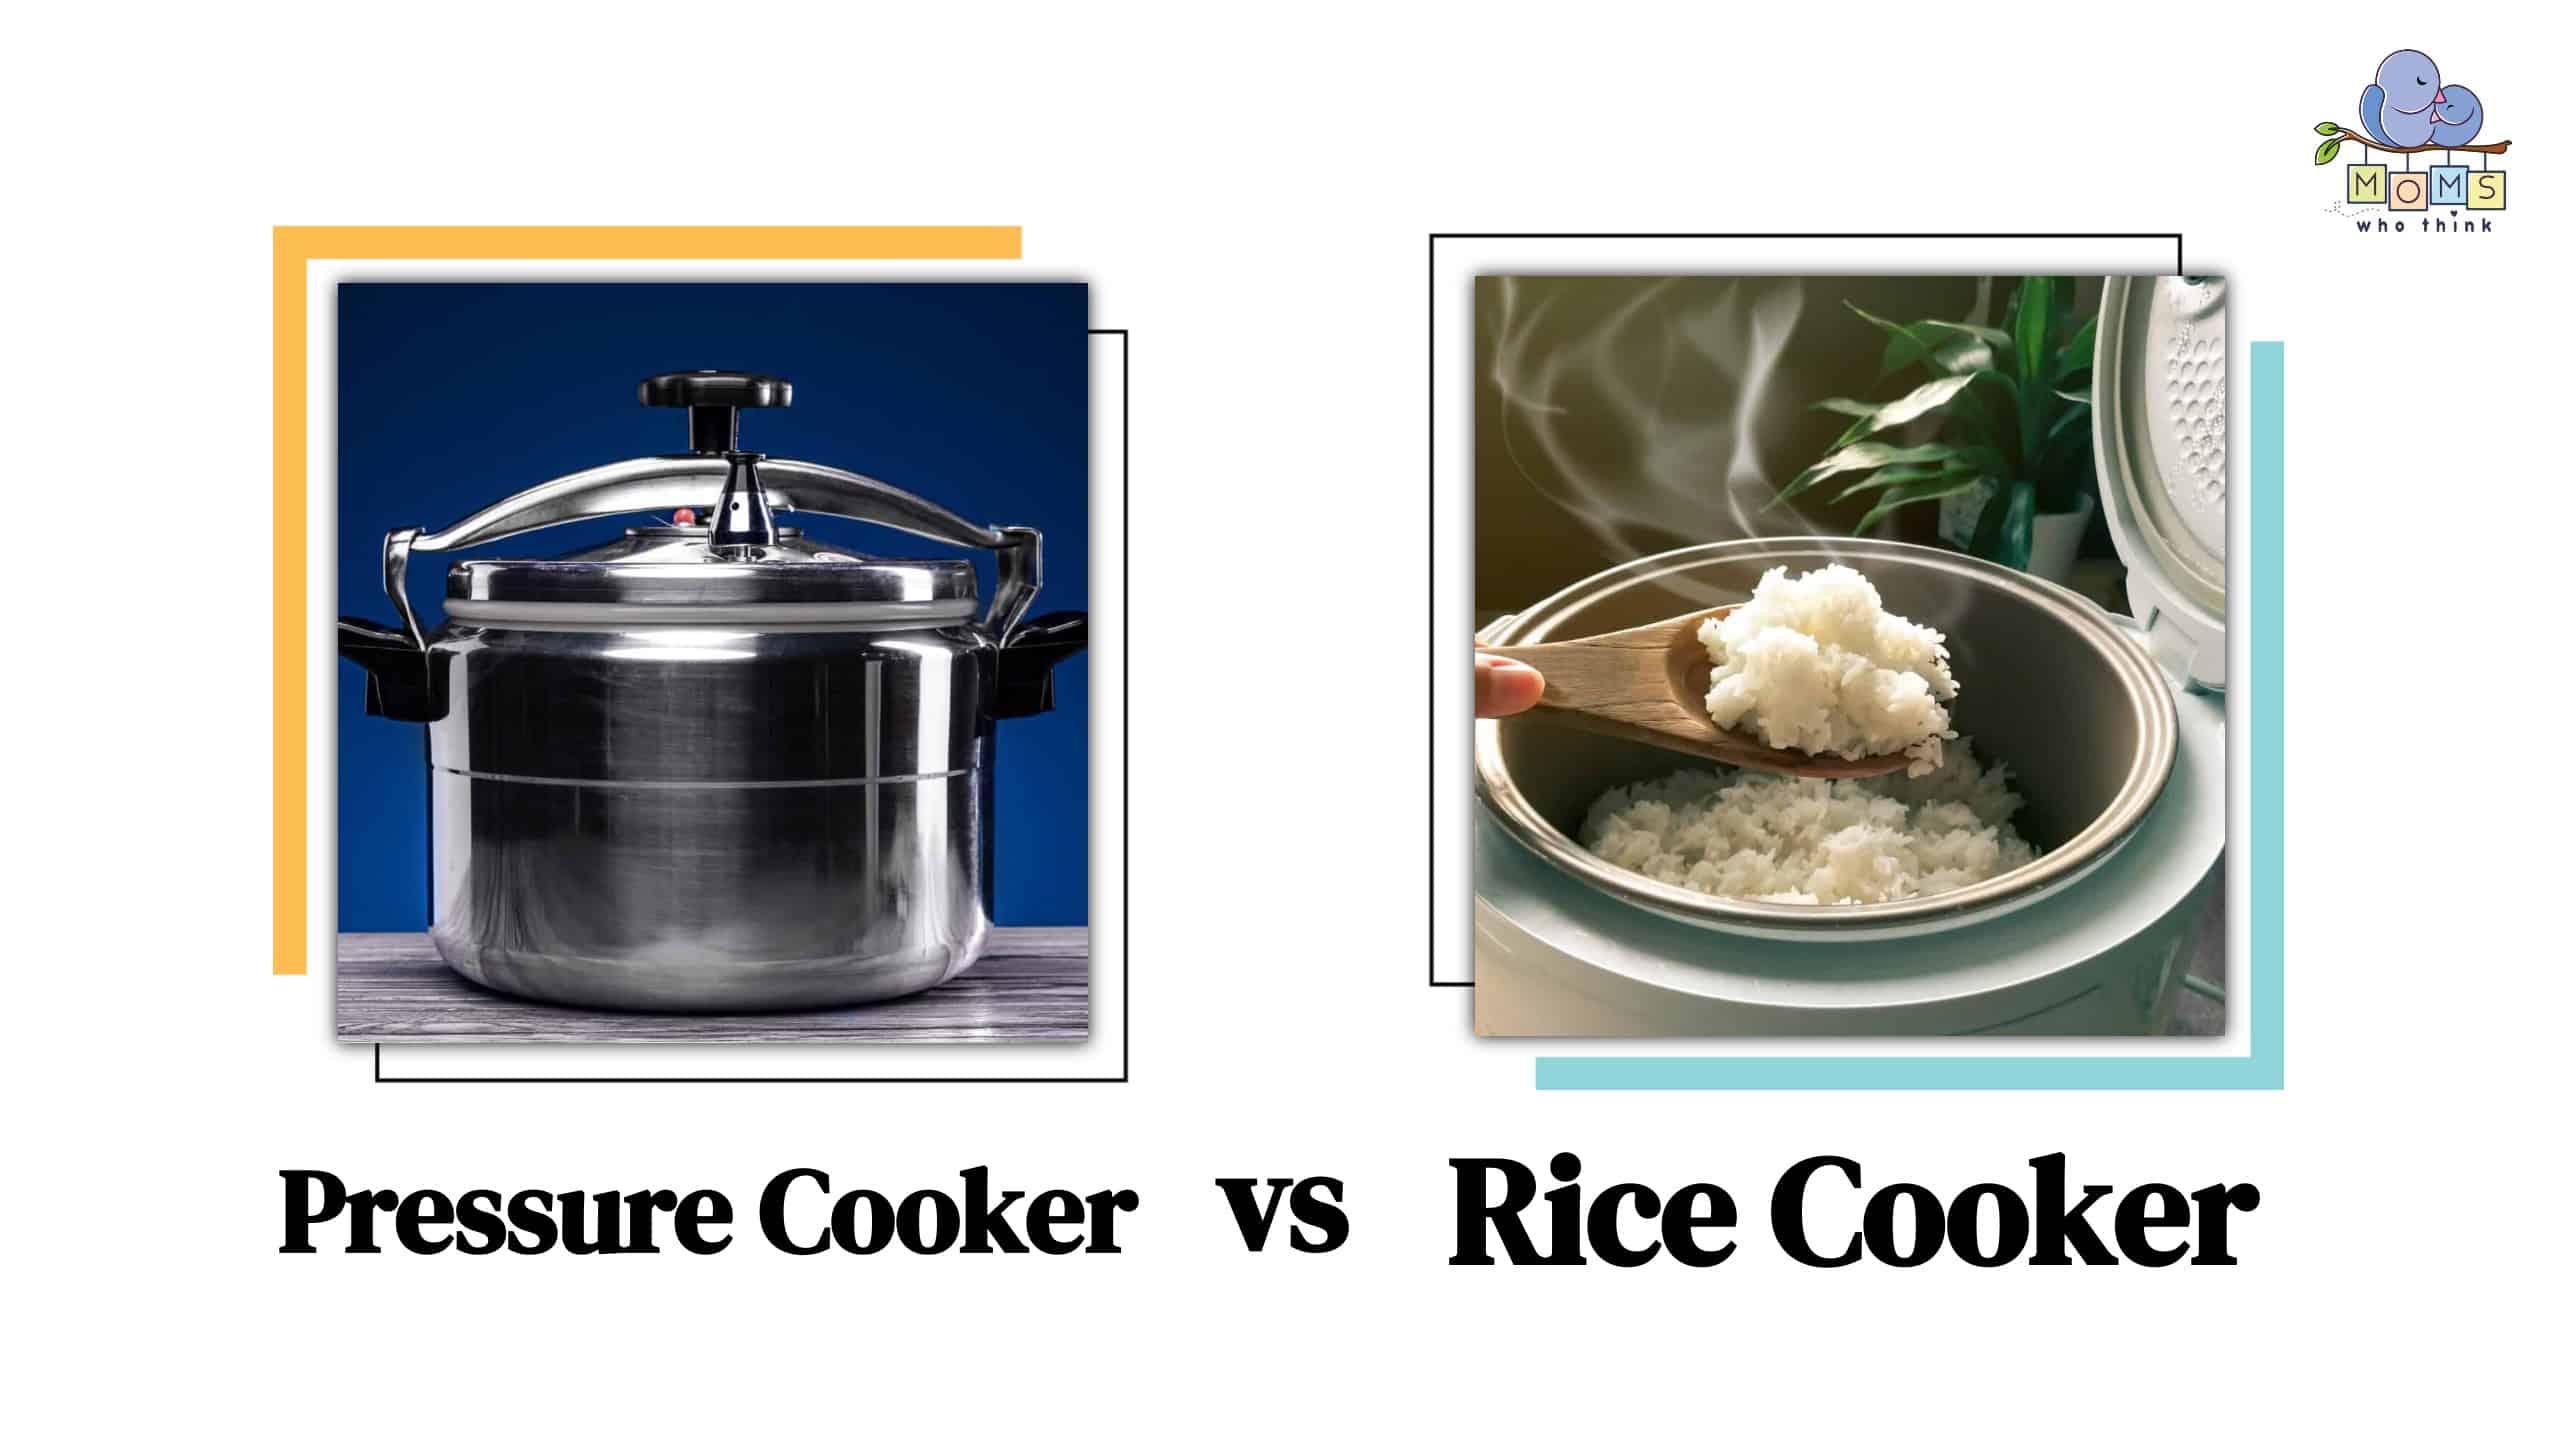 Pressure Cooker vs Rice Cooker: Which Do You Need For Your Kitchen?